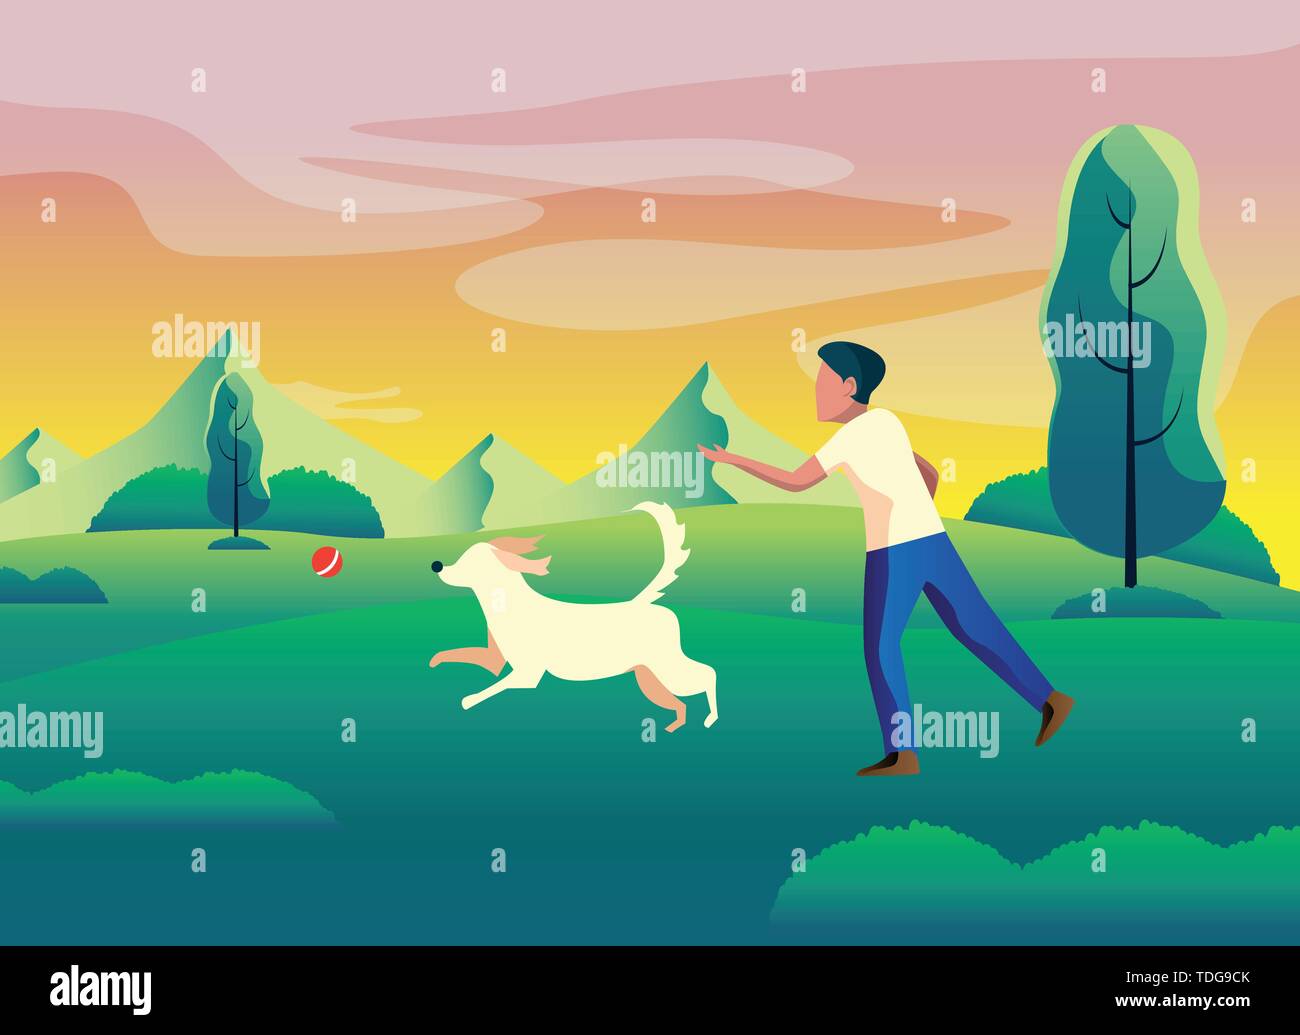 dog and boy/man playing in garden vector illustration Stock Vector